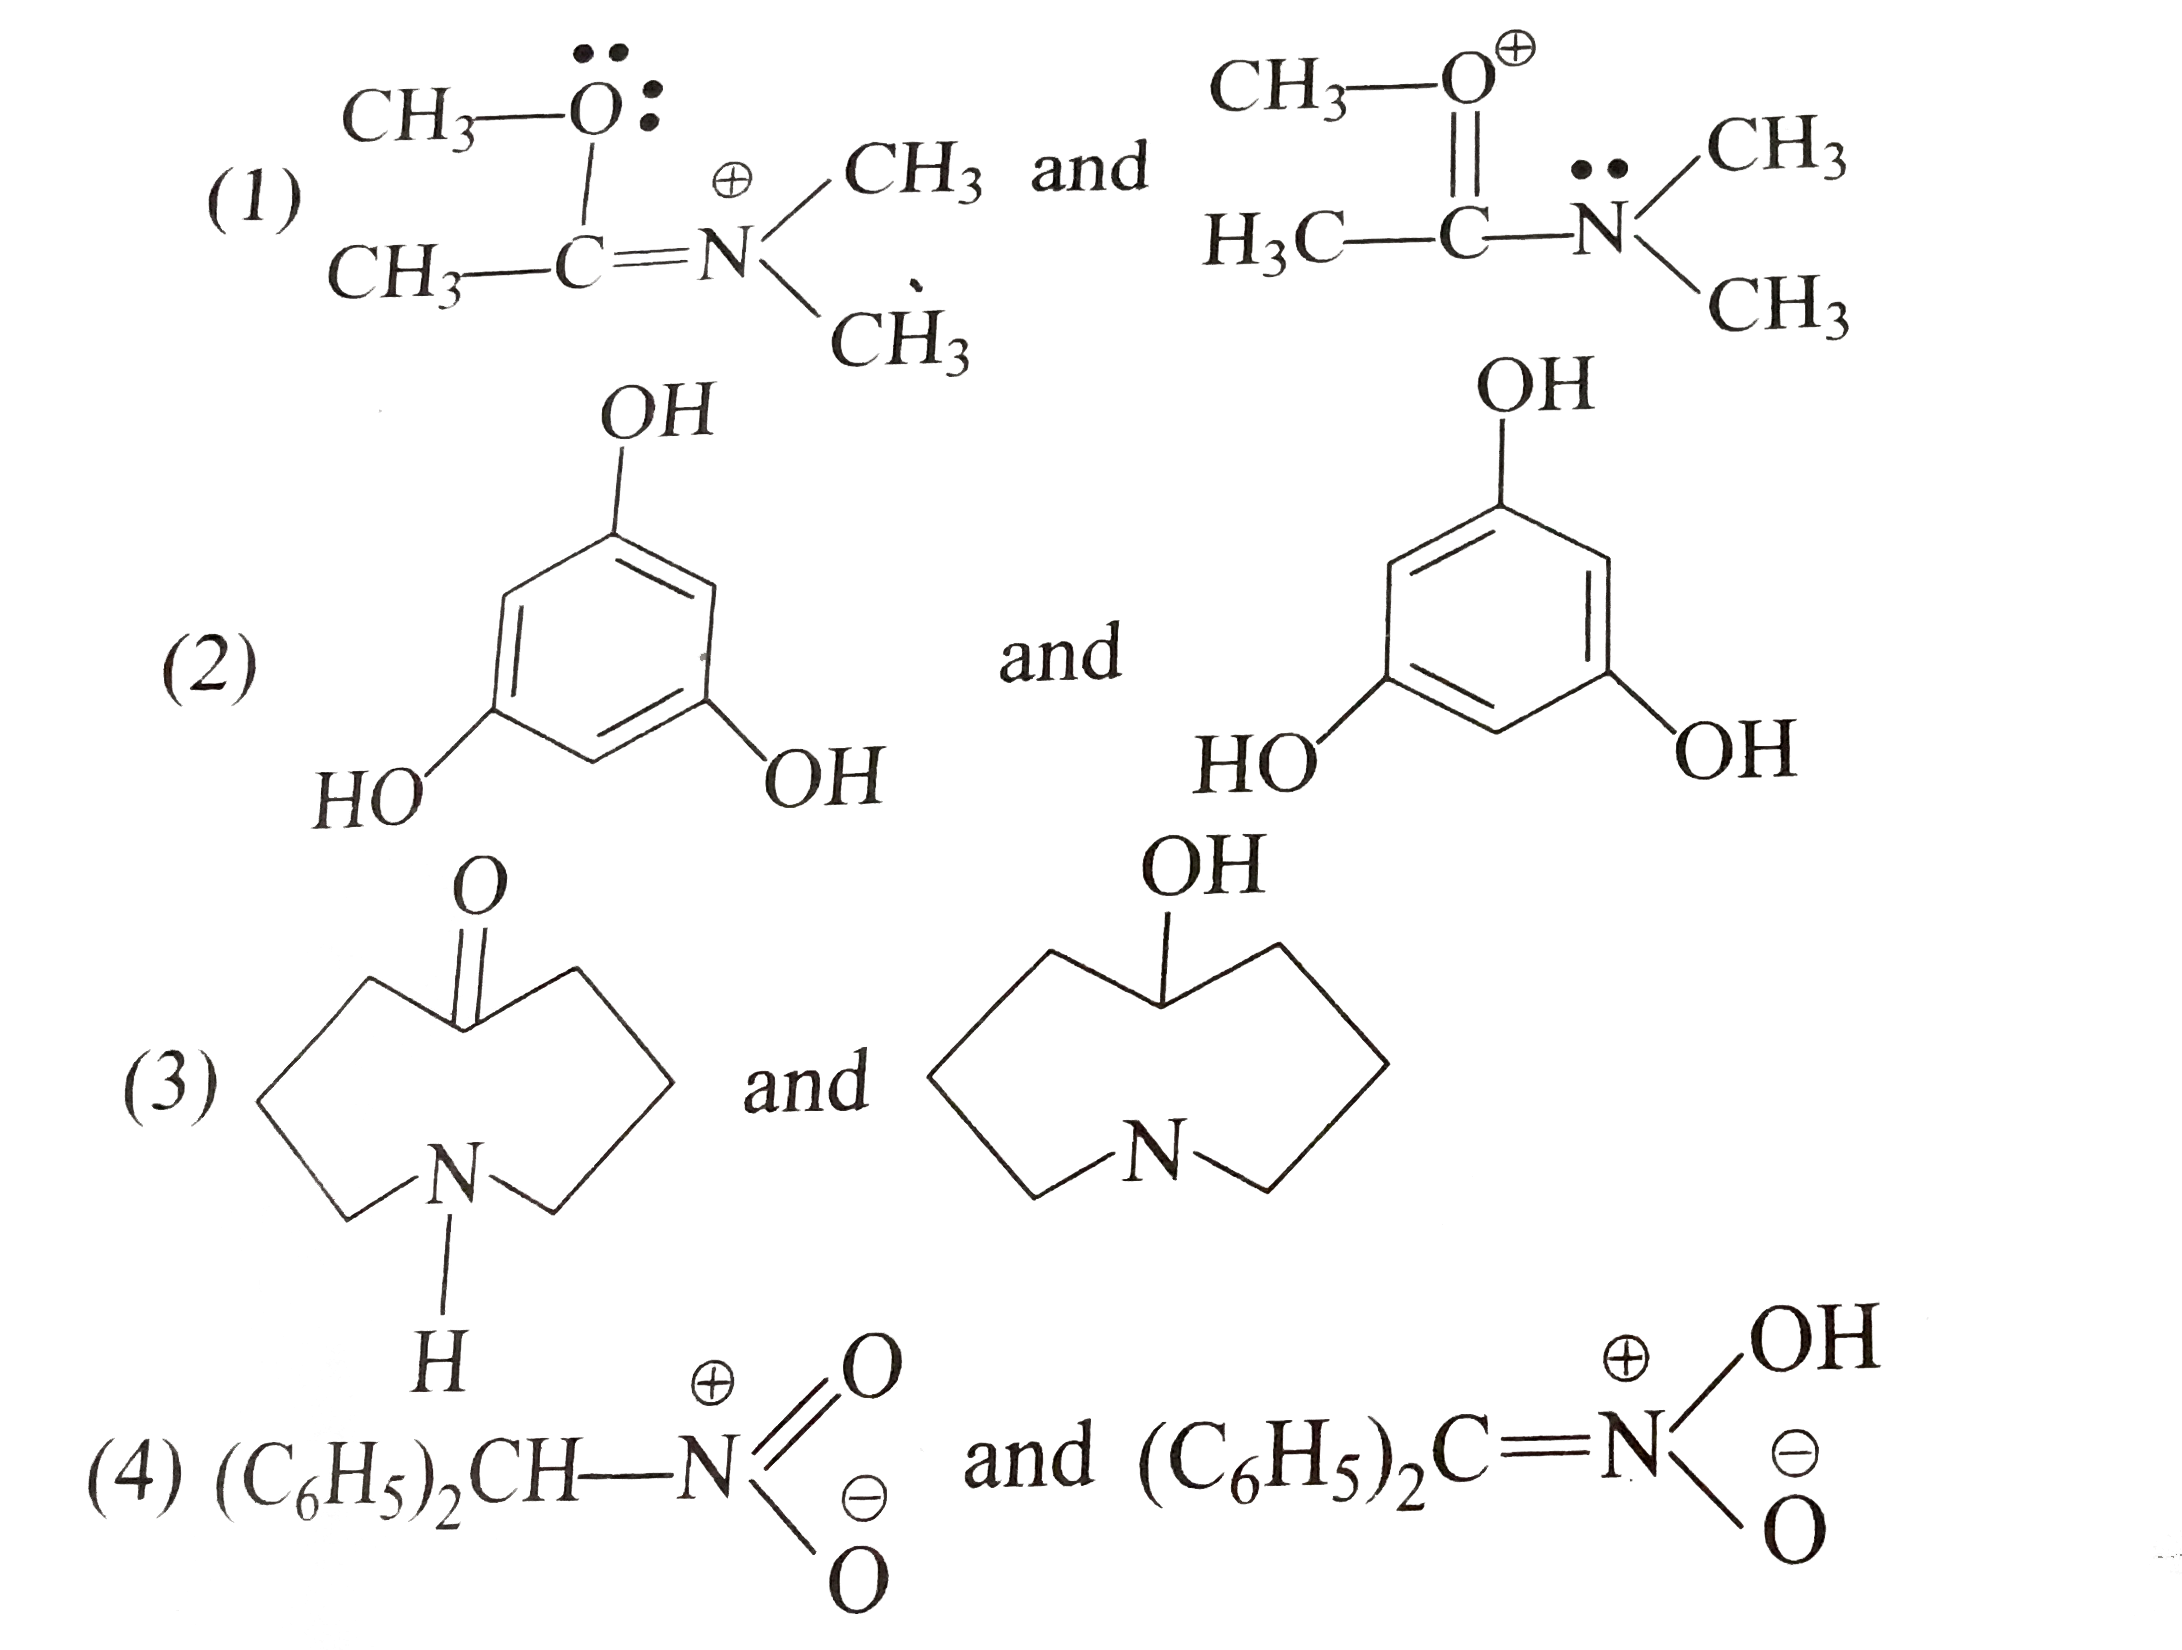 Which of the following pairs of structure are resonance structure?